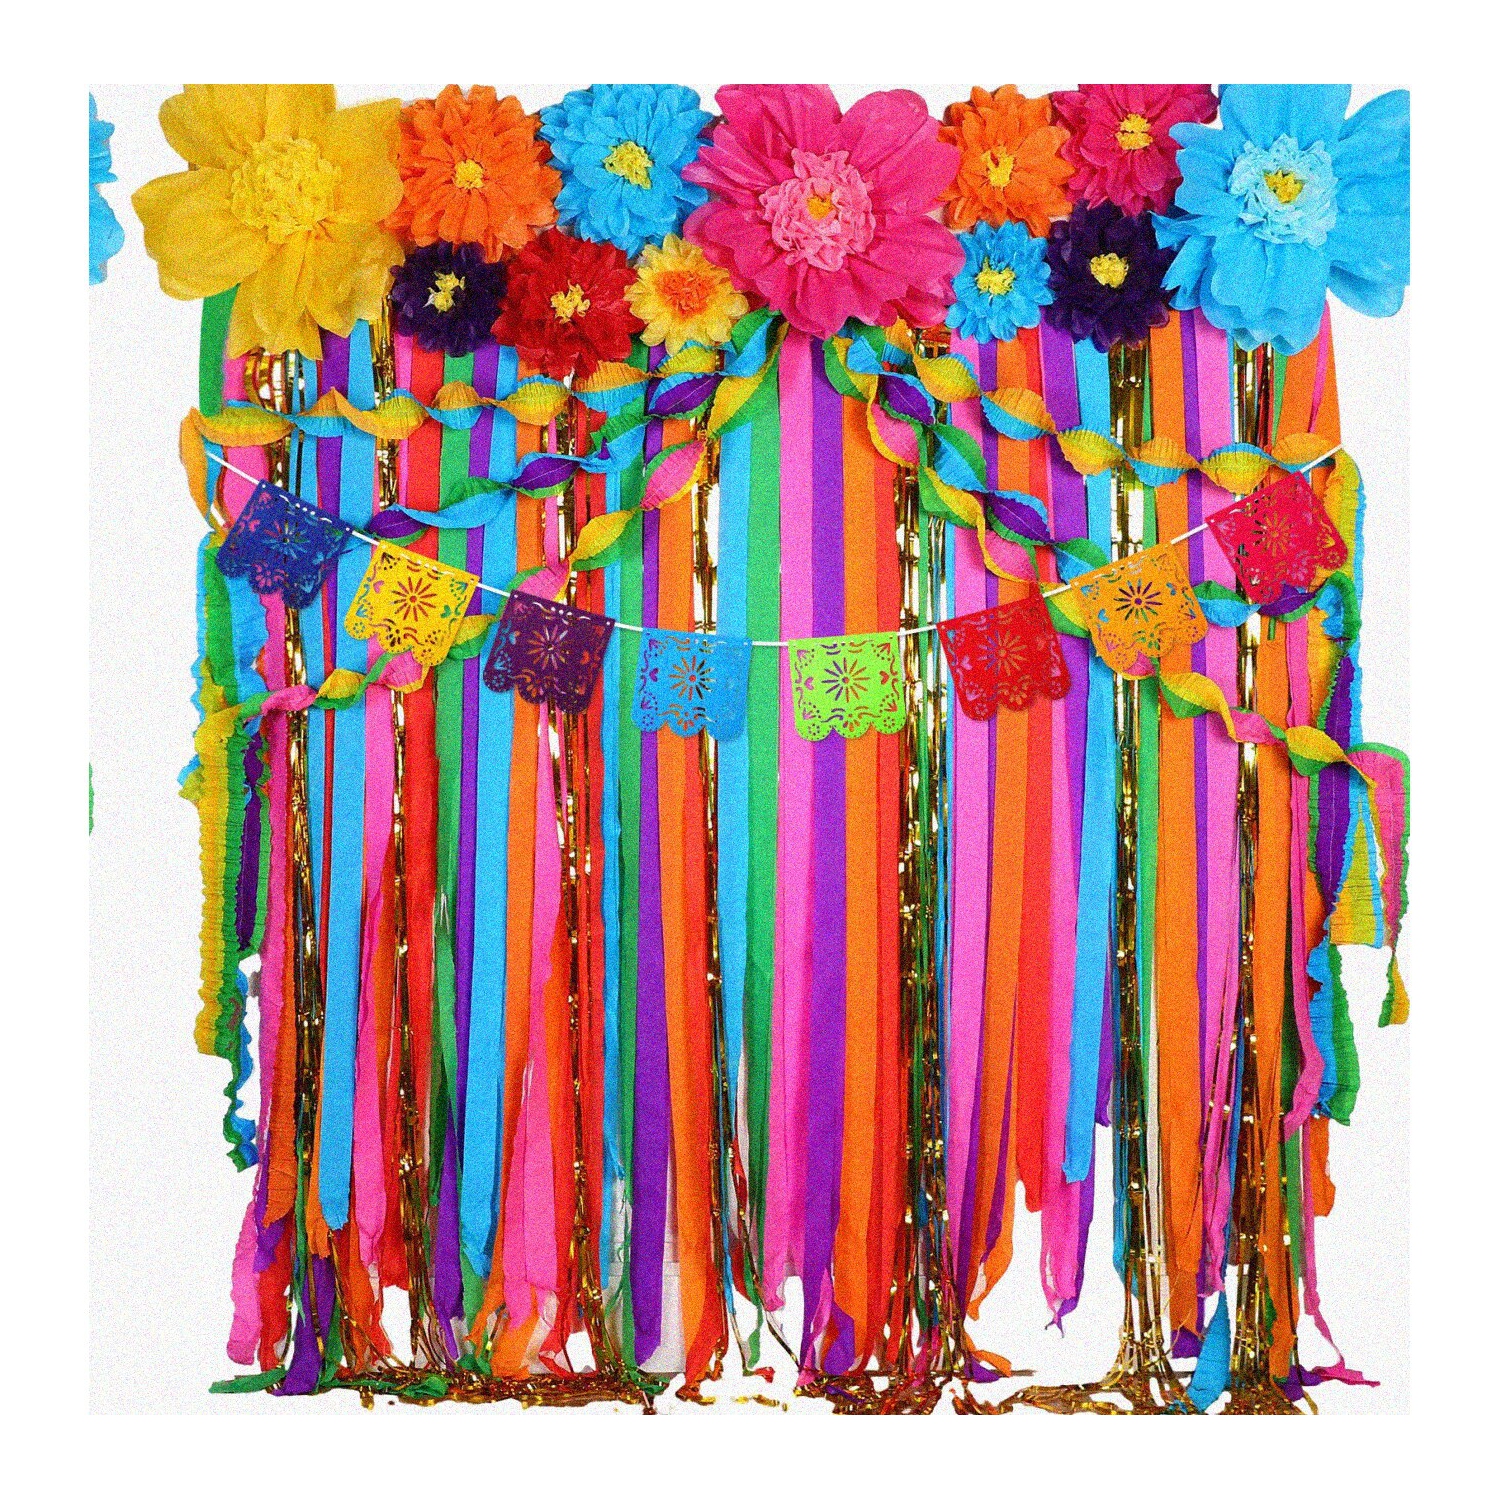 MexiFiesta 28-Piece Paper Flower & Streamer Set: Vibrant Cinco De Mayo Party Decorations with Ruffled Backdrop & Papel Picado Banner!